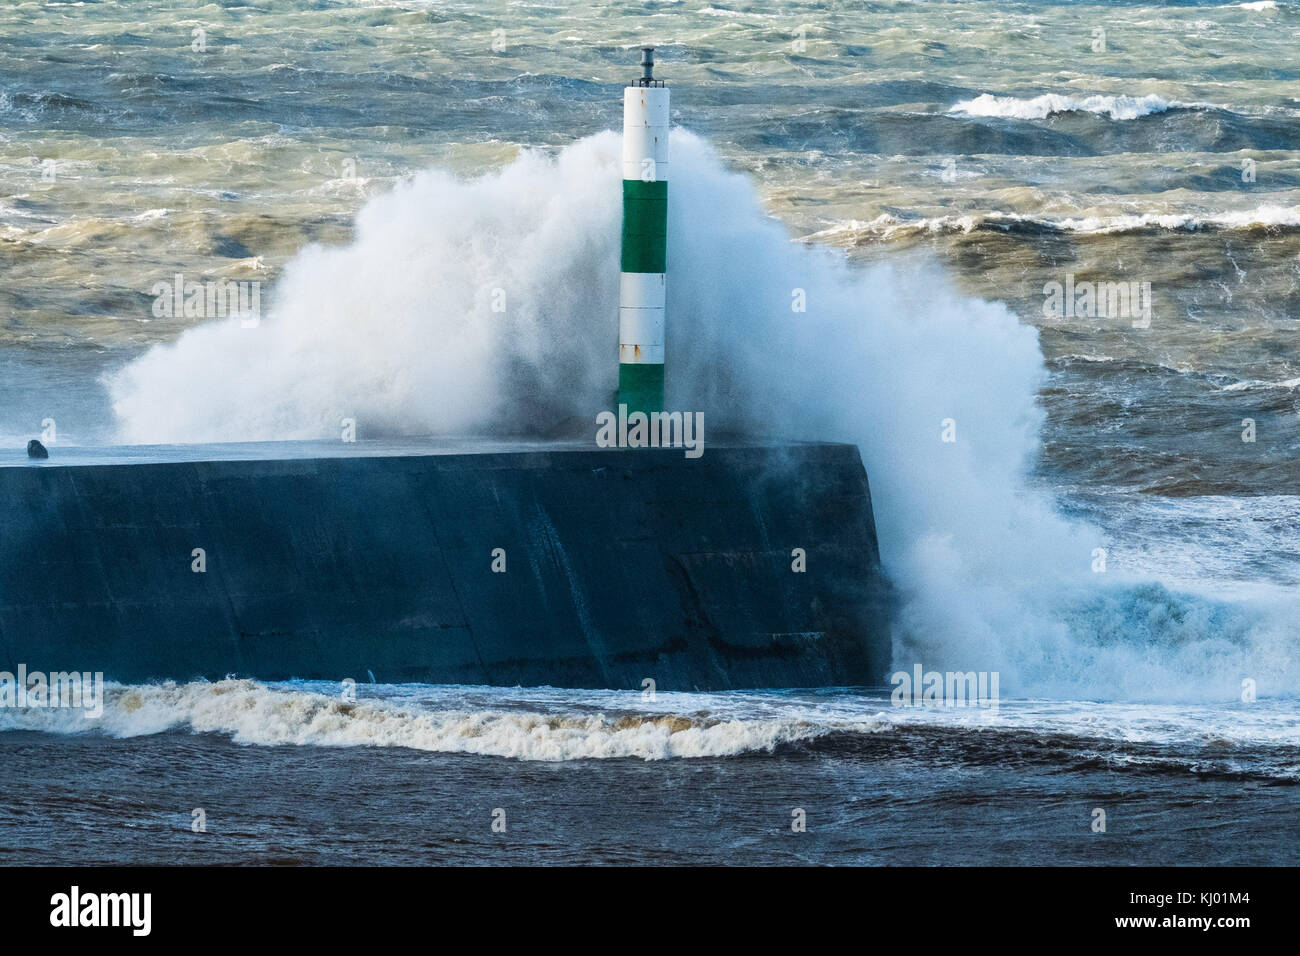 Aberystwyth Wales UK, Thursday 23 November 2017 UK Weather: High tides and very strong winds combine to bring waves crashing into the sea defences and promenade in Aberystwyth, on the Cardigan Bay coast of west wales. photo Credit: Keith Morris/Alamy Live News Stock Photo